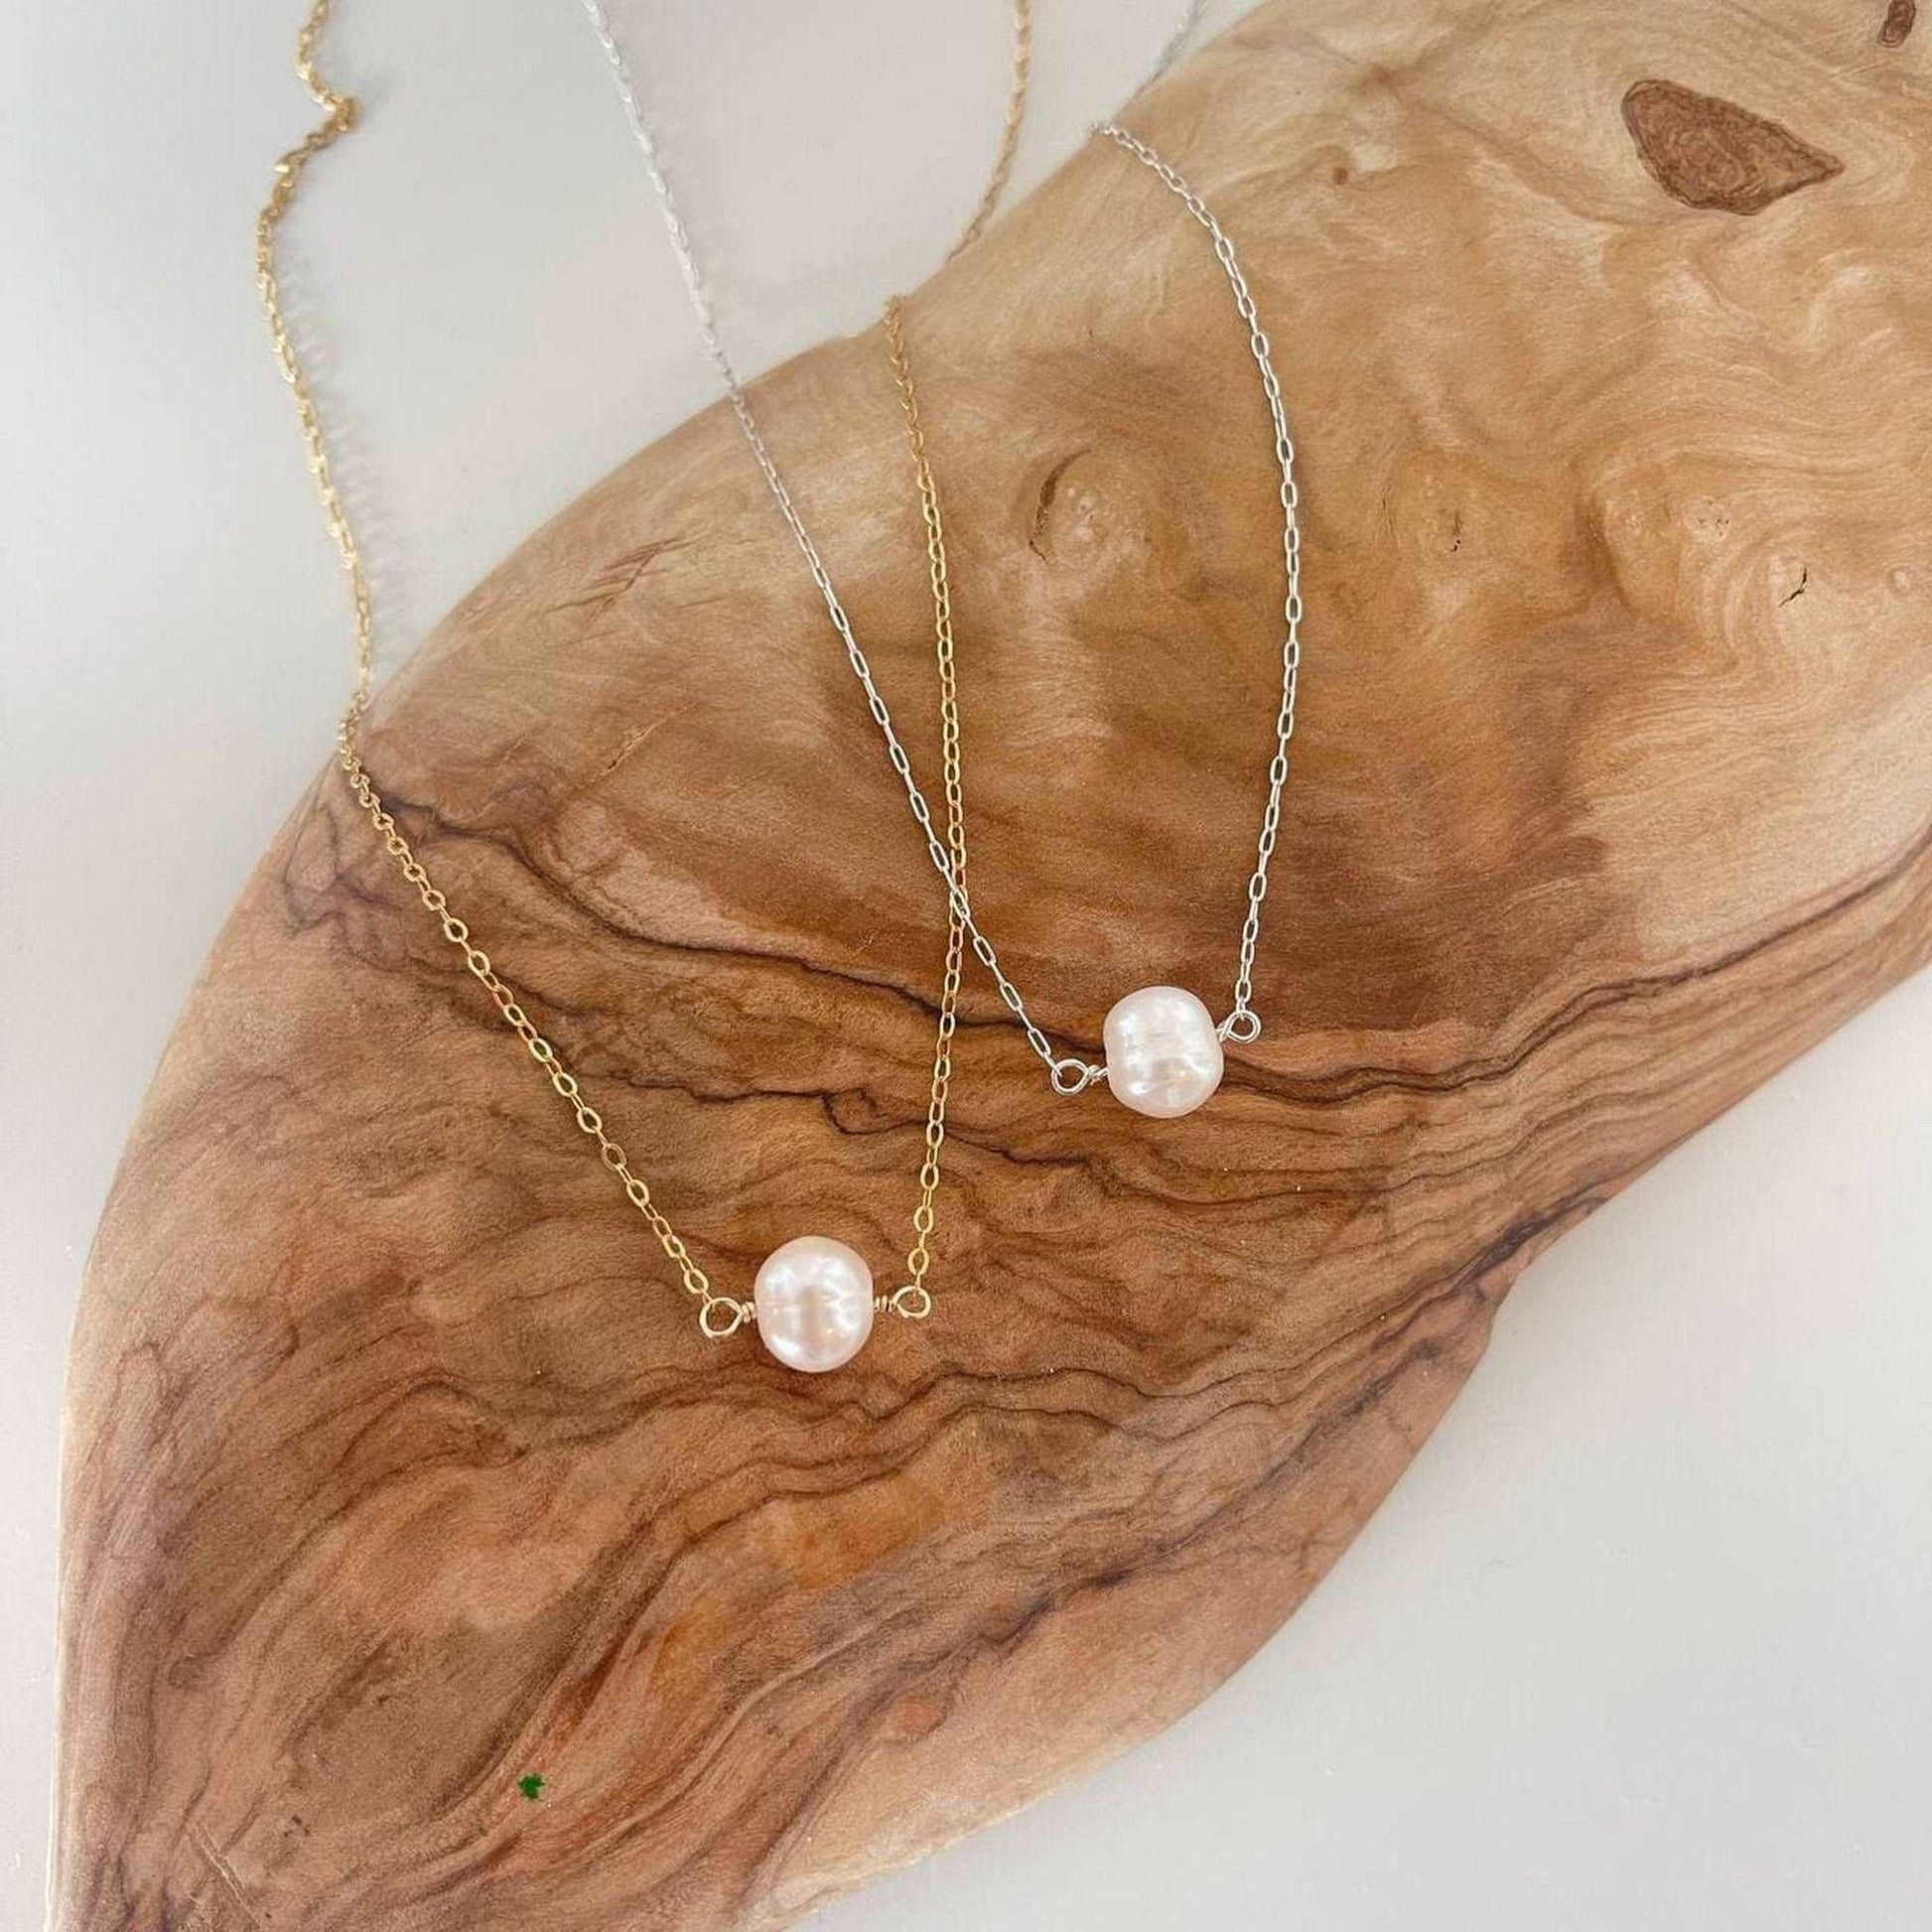 Floating Single Pearl Necklace |Simple Pearl Necklace sjewellery|sara jewellery shop toronto